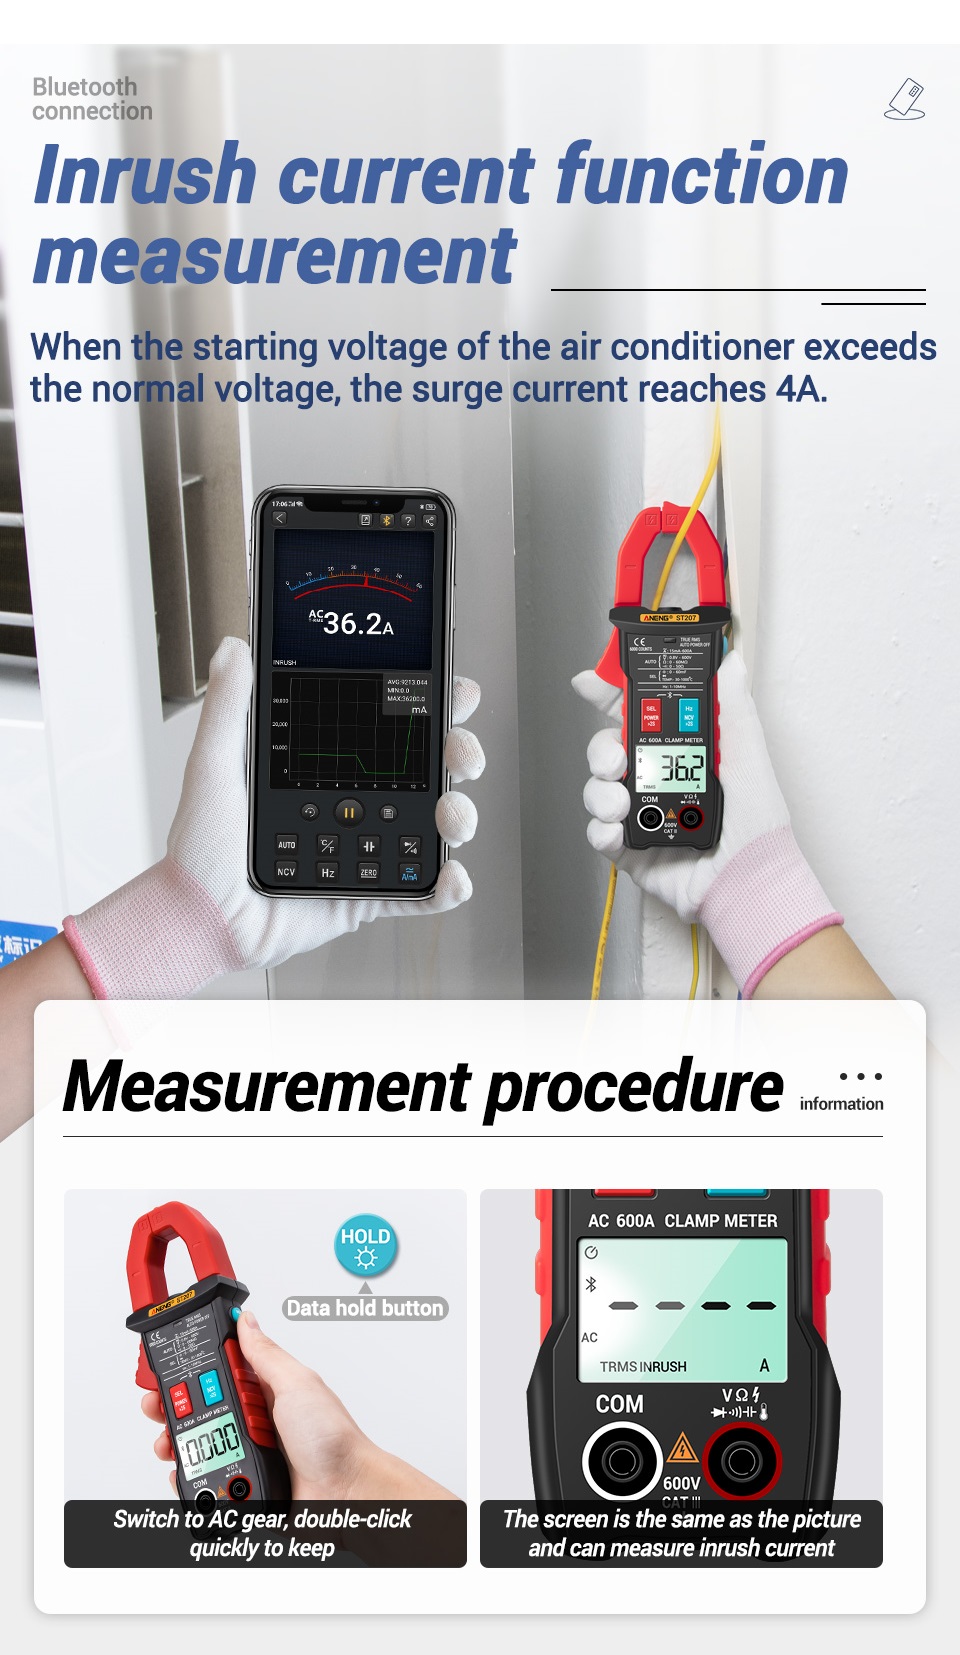 ANENG-ST207-Digital-bluetooth-Multimeter-Clamp-Meter-6000-Counts-True-RMS-DCAC-Voltage-Tester-AC-Cur-1762792-5